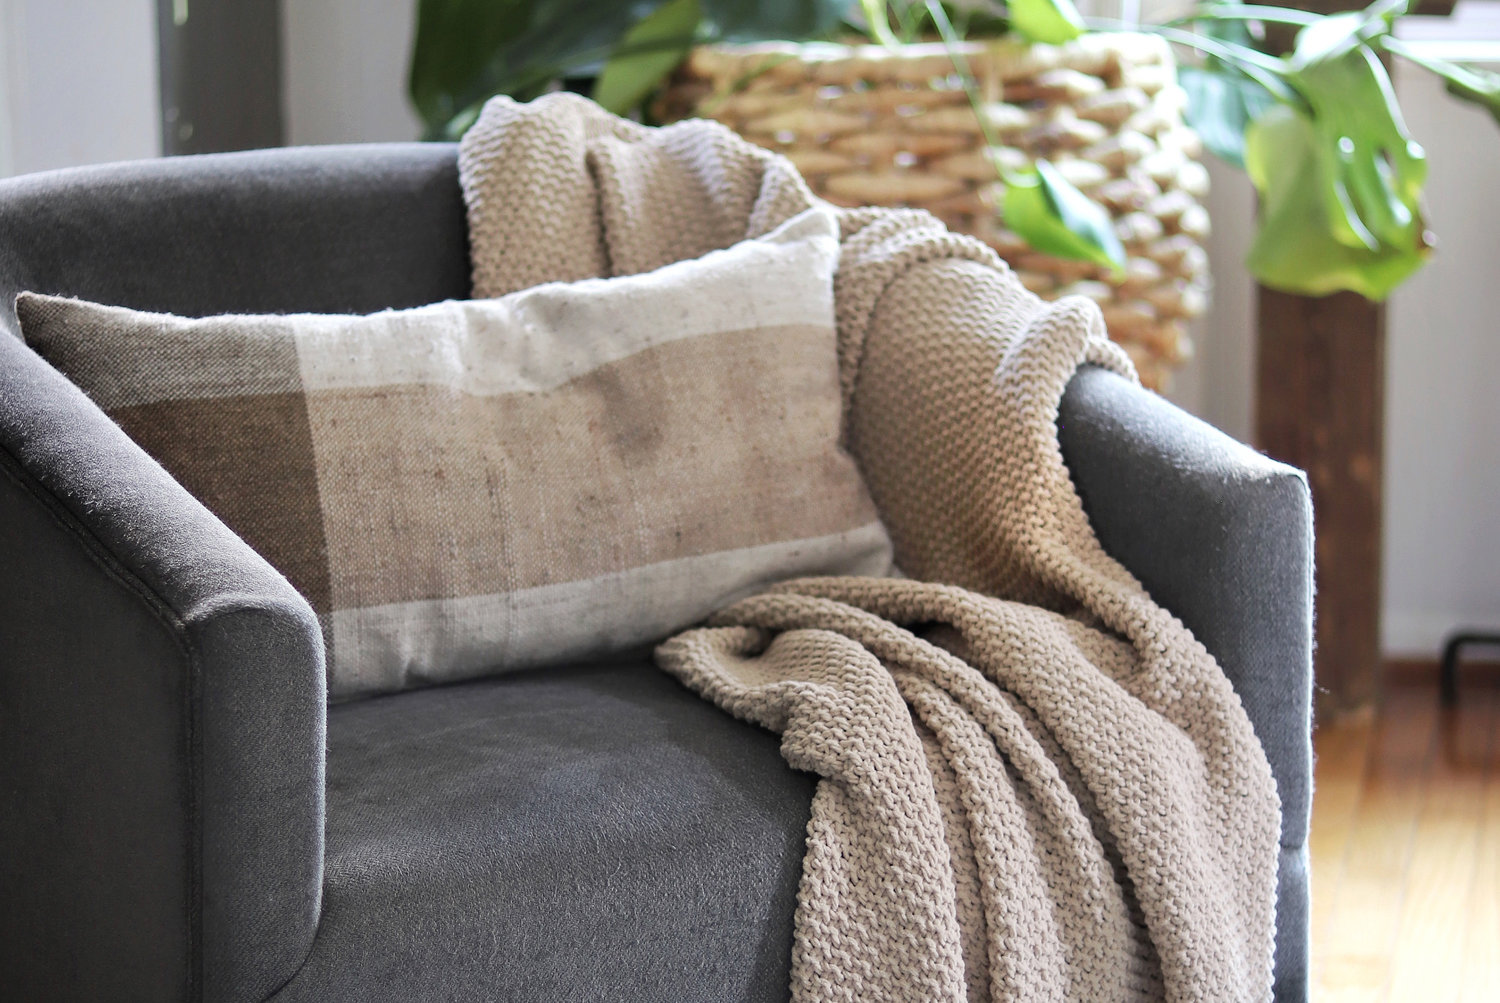 Keep throws within reach for chilly nights